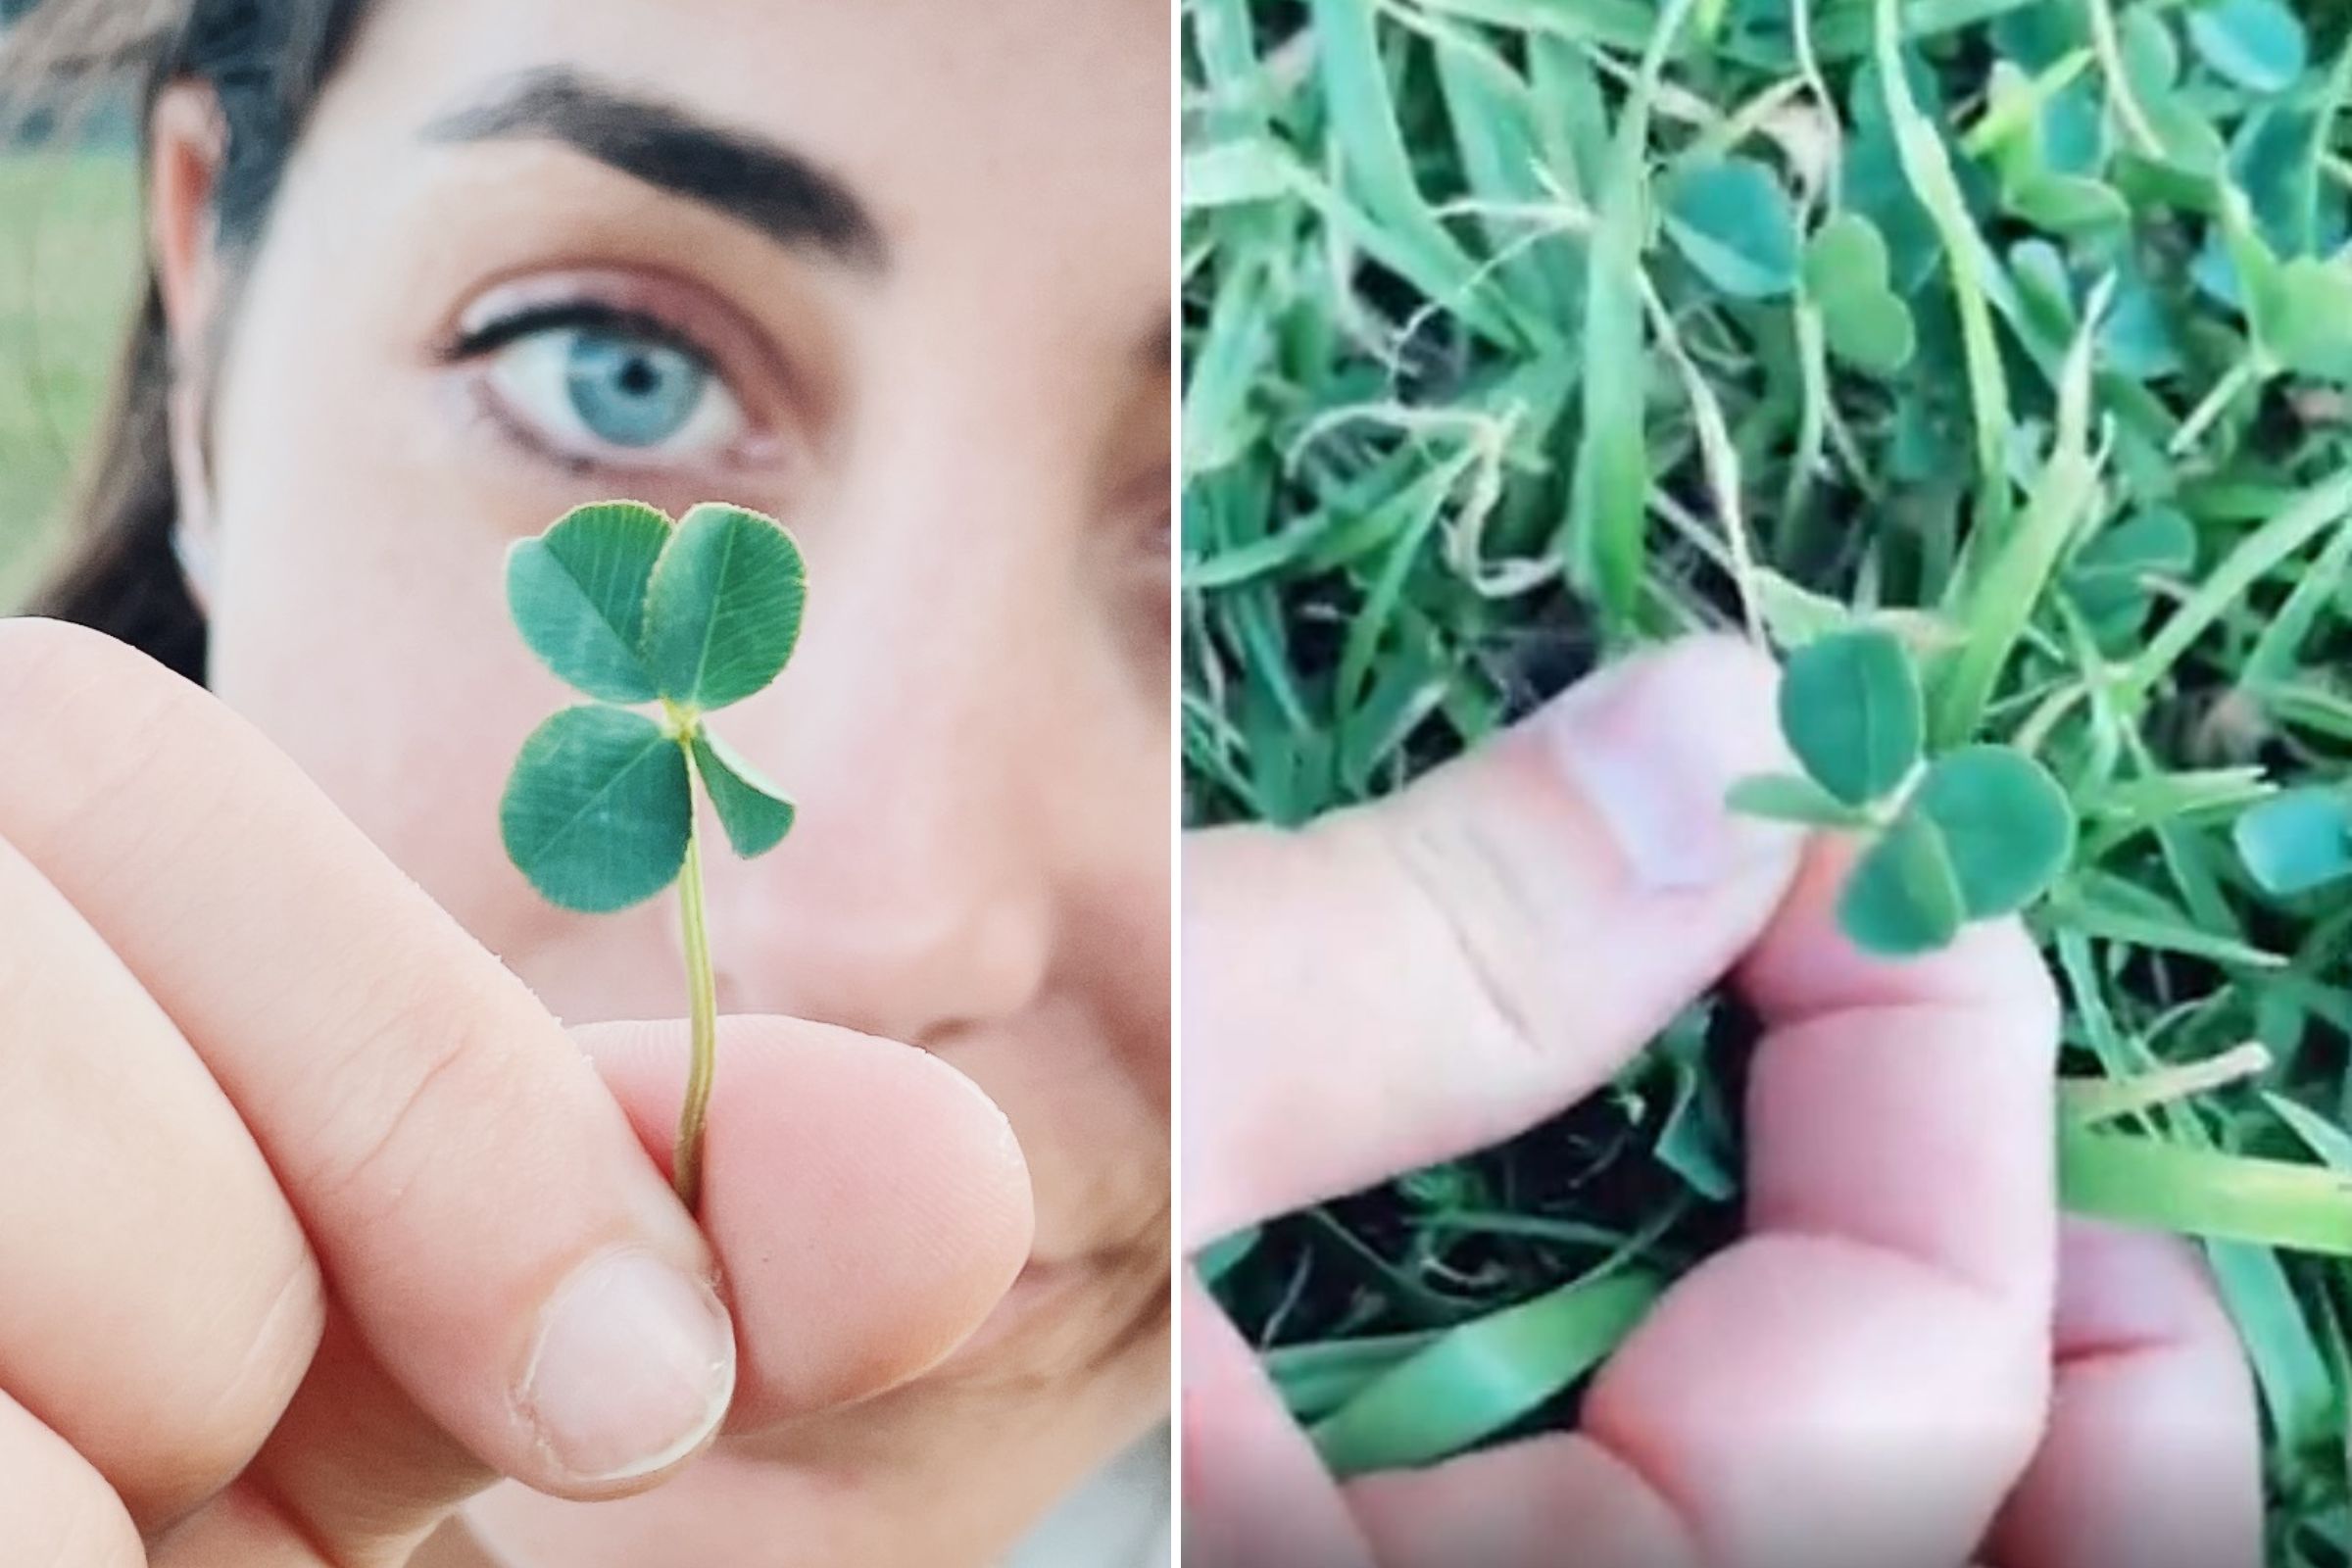 Illinois woman finds rare six-leaf clover after decades-long search